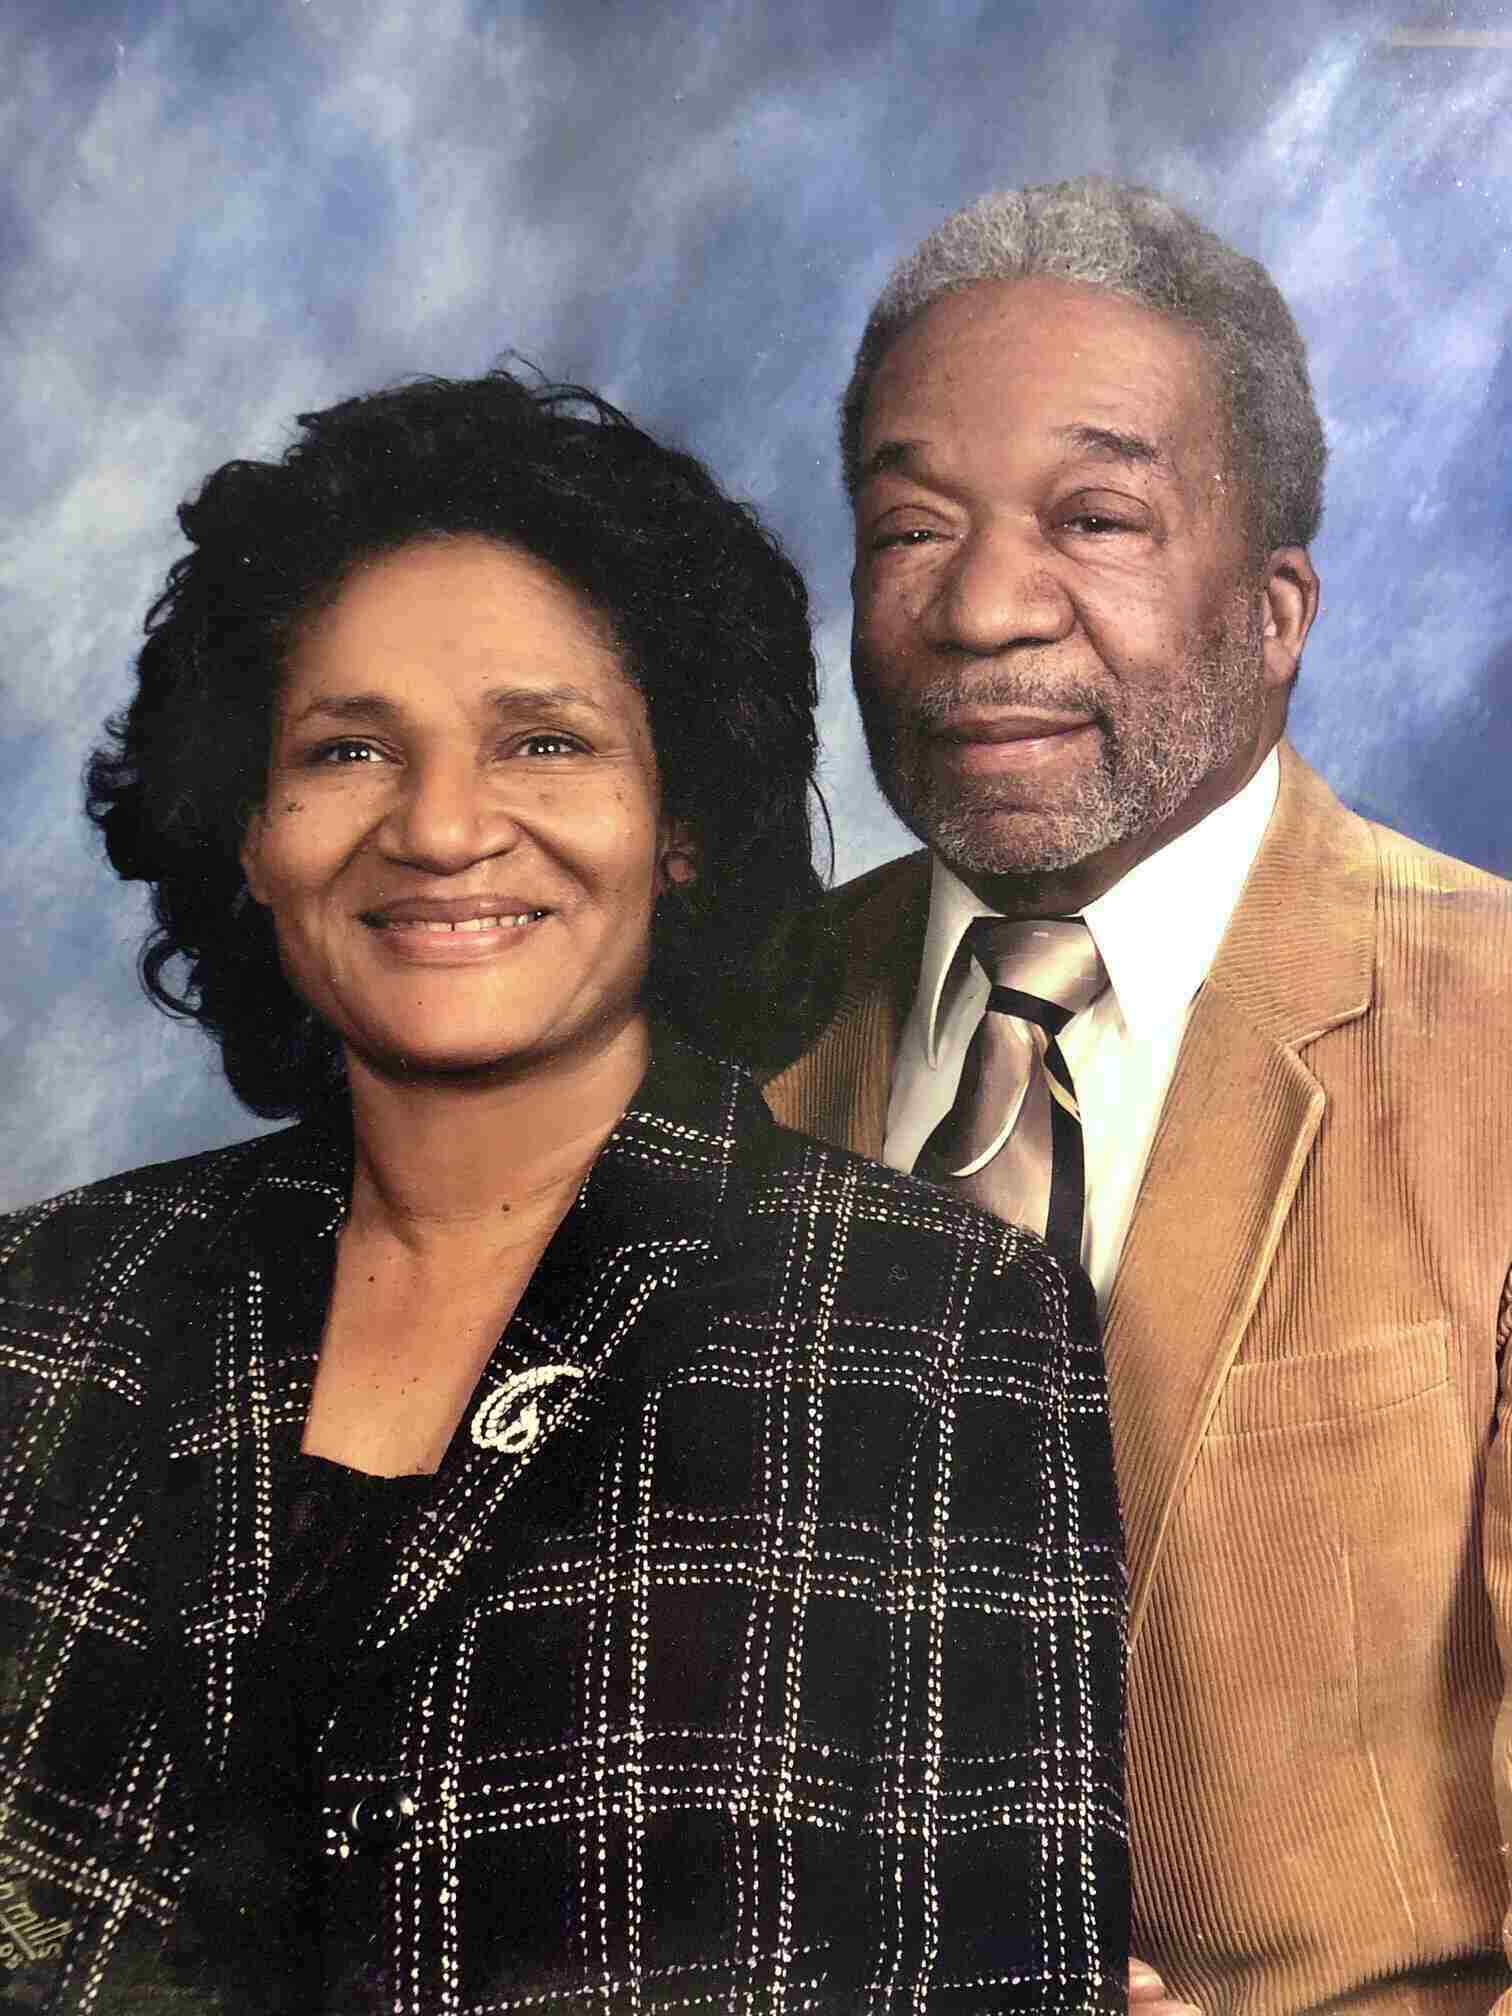 Janice and Othel Johnson smile together.